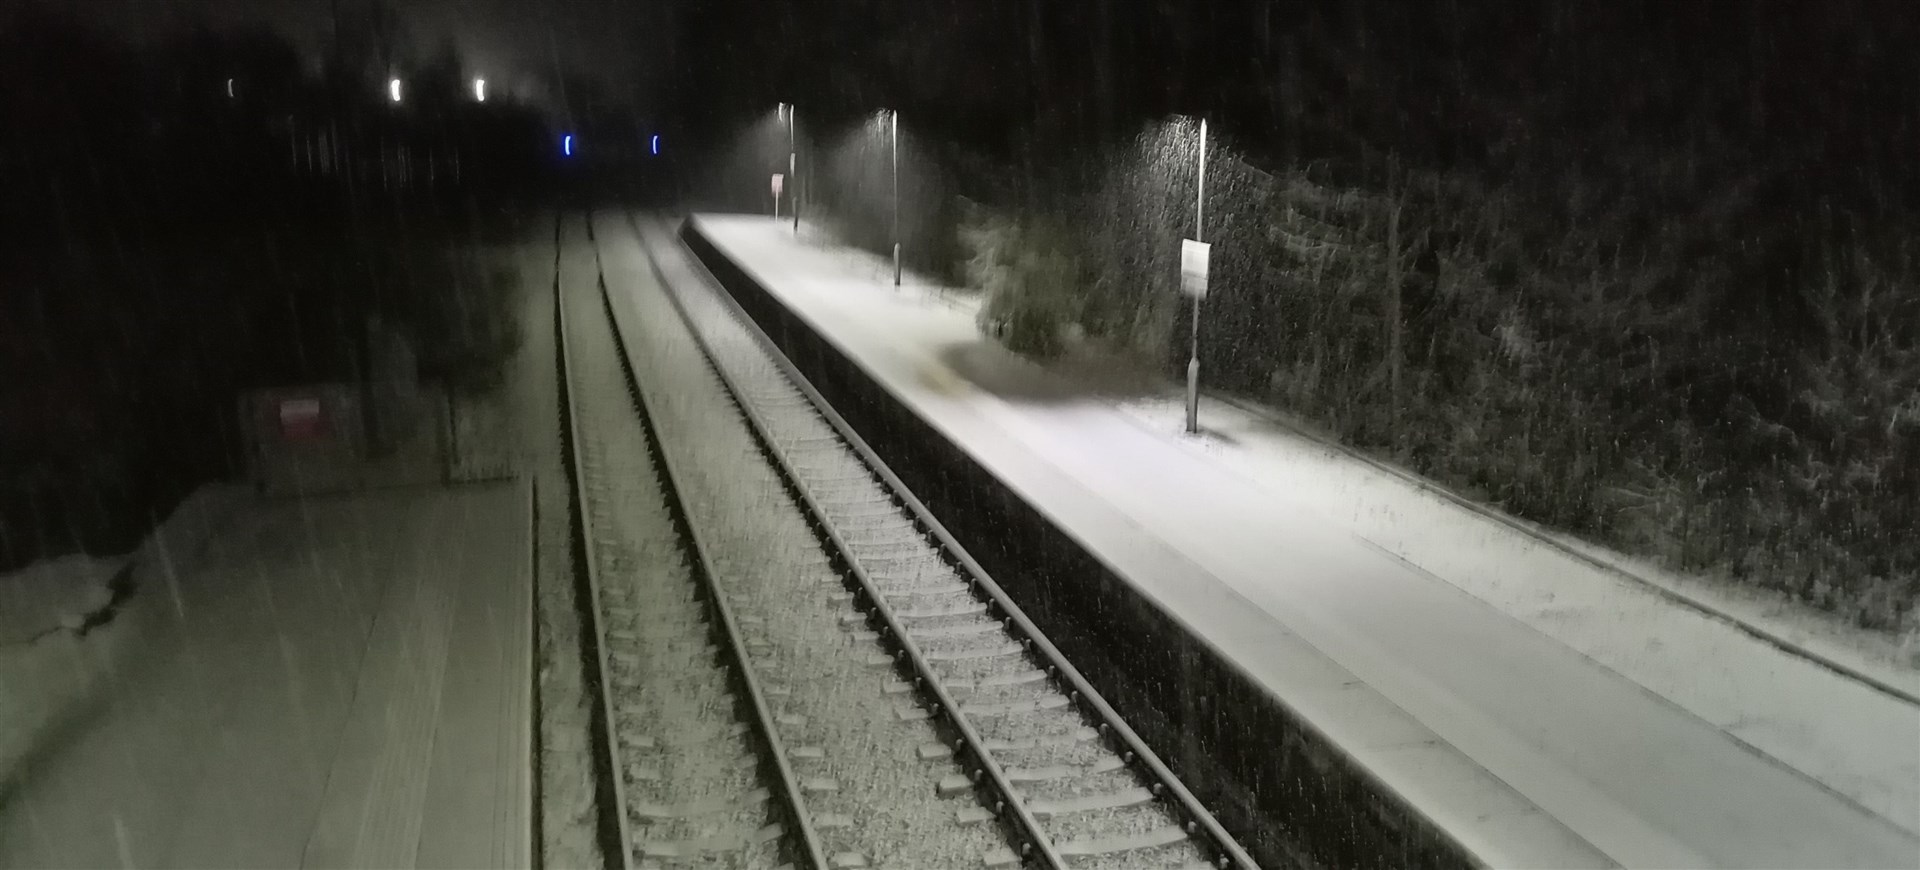 Snow was falling at Tain Railway Station first thing on Saturday morning.